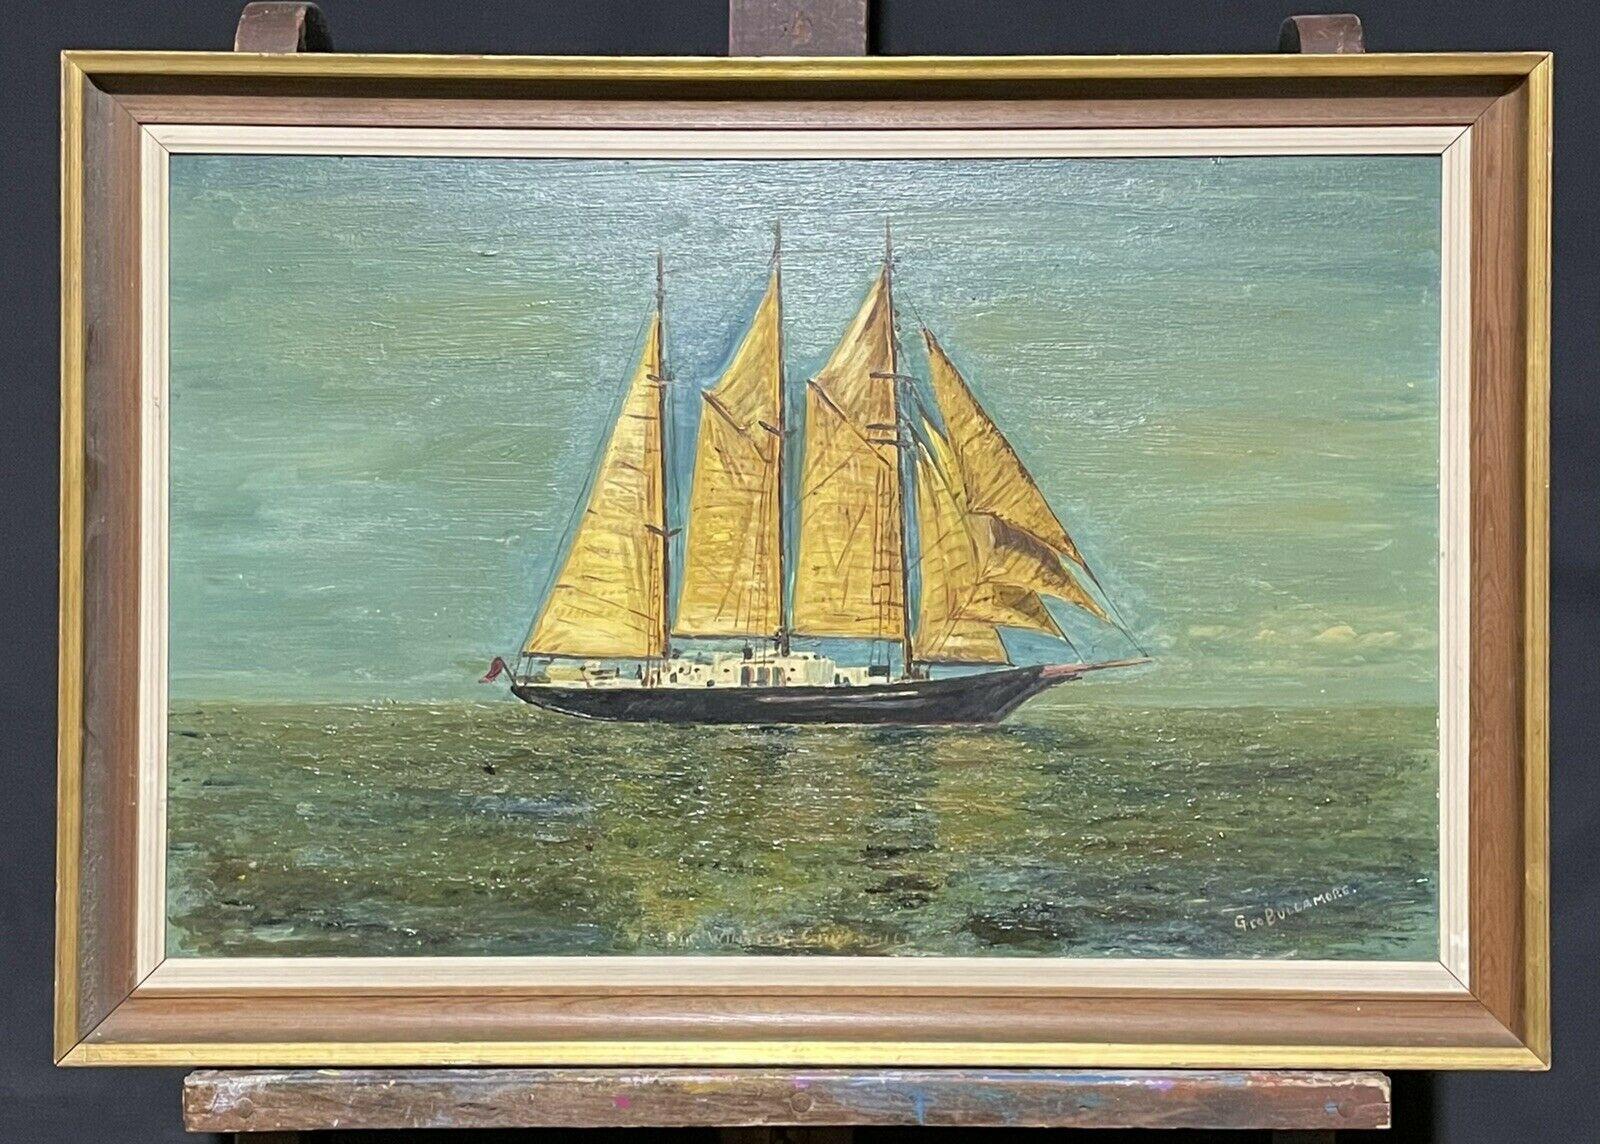 VINTAGE ENGLISH MARINE OIL PAINTING - PORTRAIT OF SIR WINSTON CHURCHILL YACHT - Painting by George Bullamore